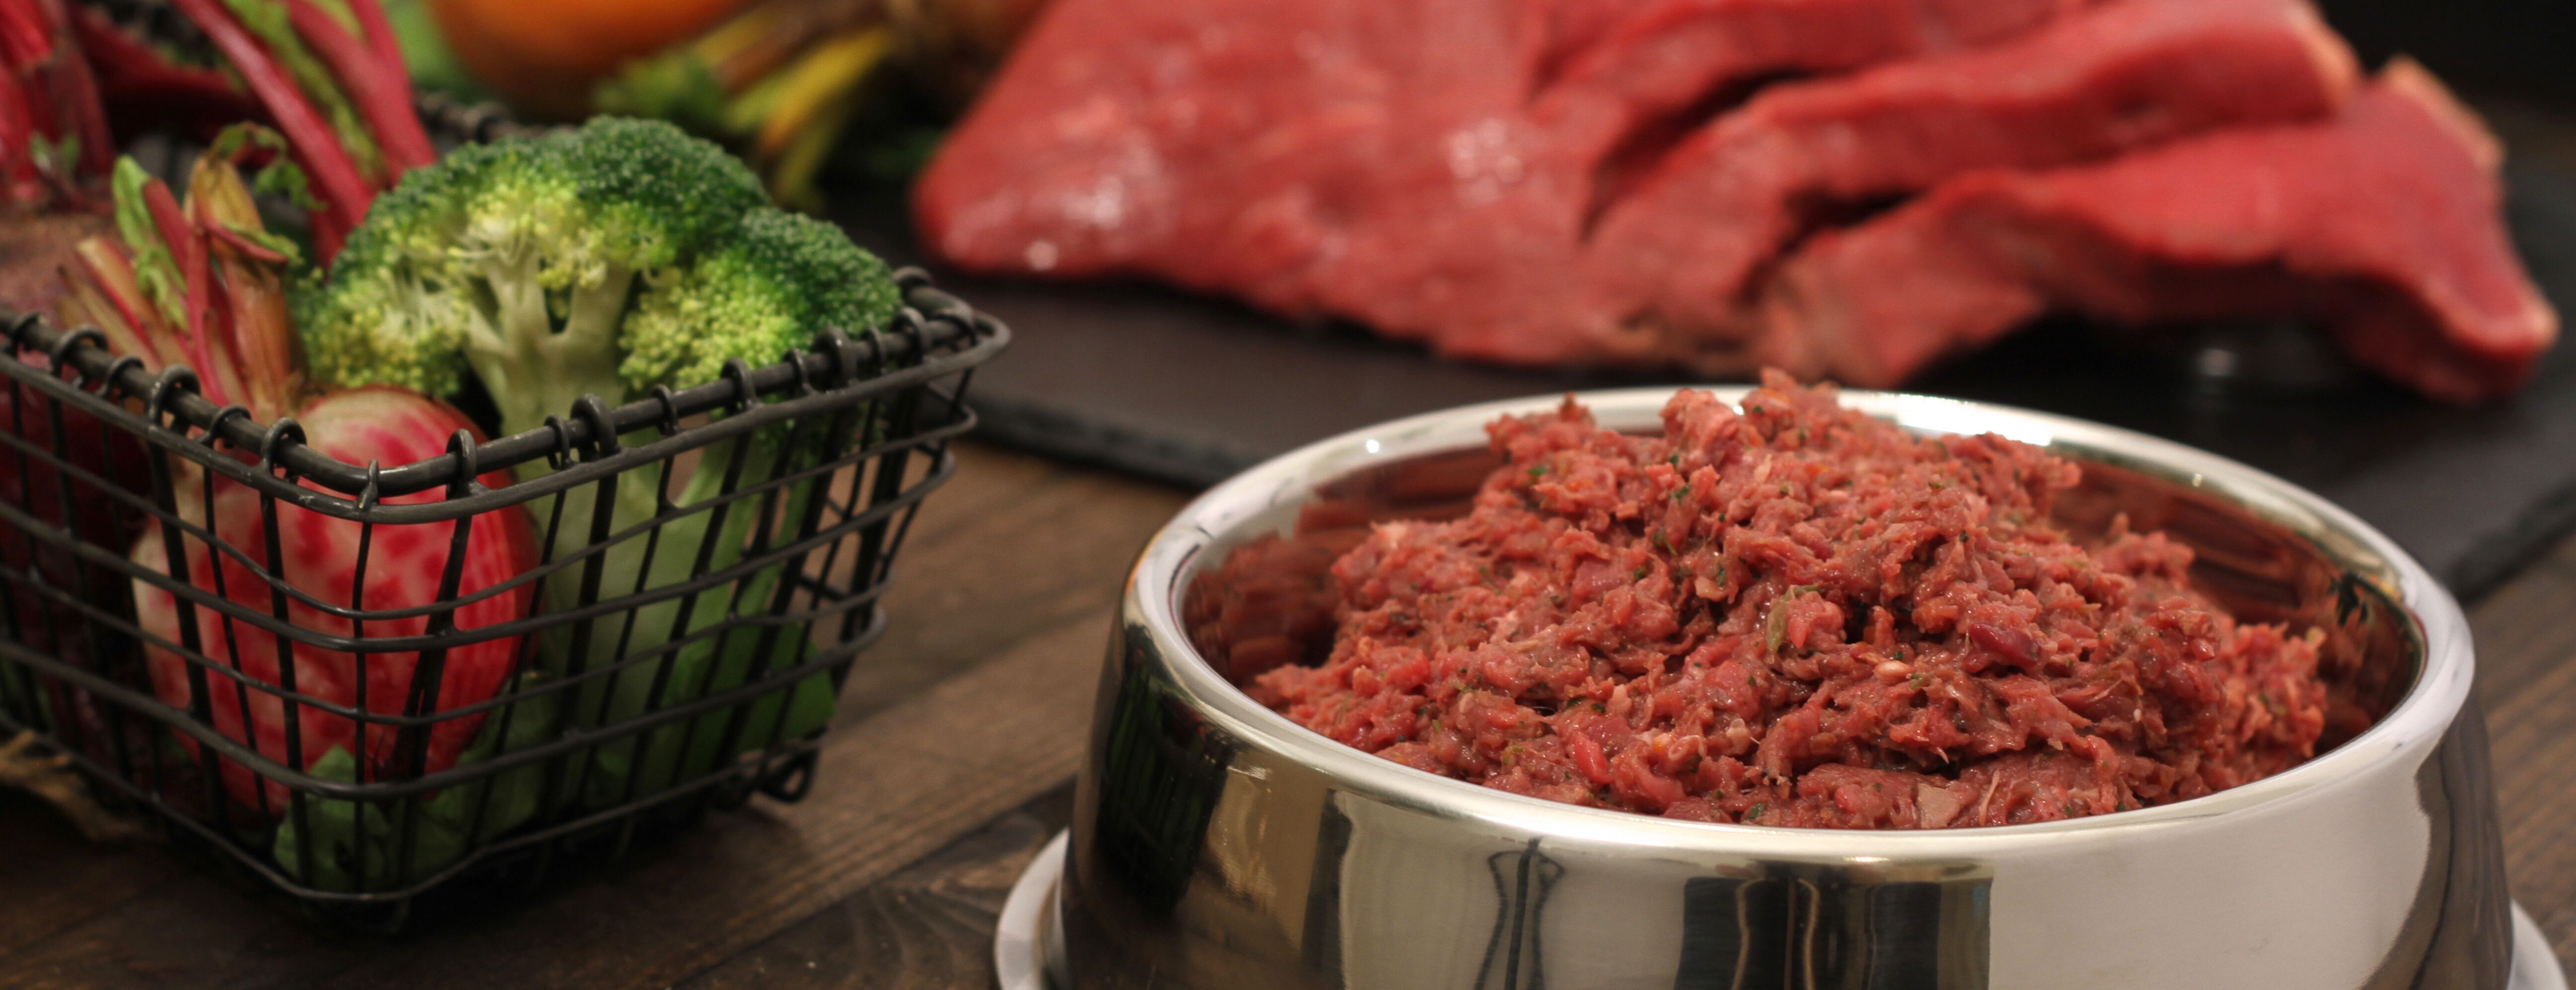 Grass-Fed vs. Grain-Fed Beef — What's the Difference?